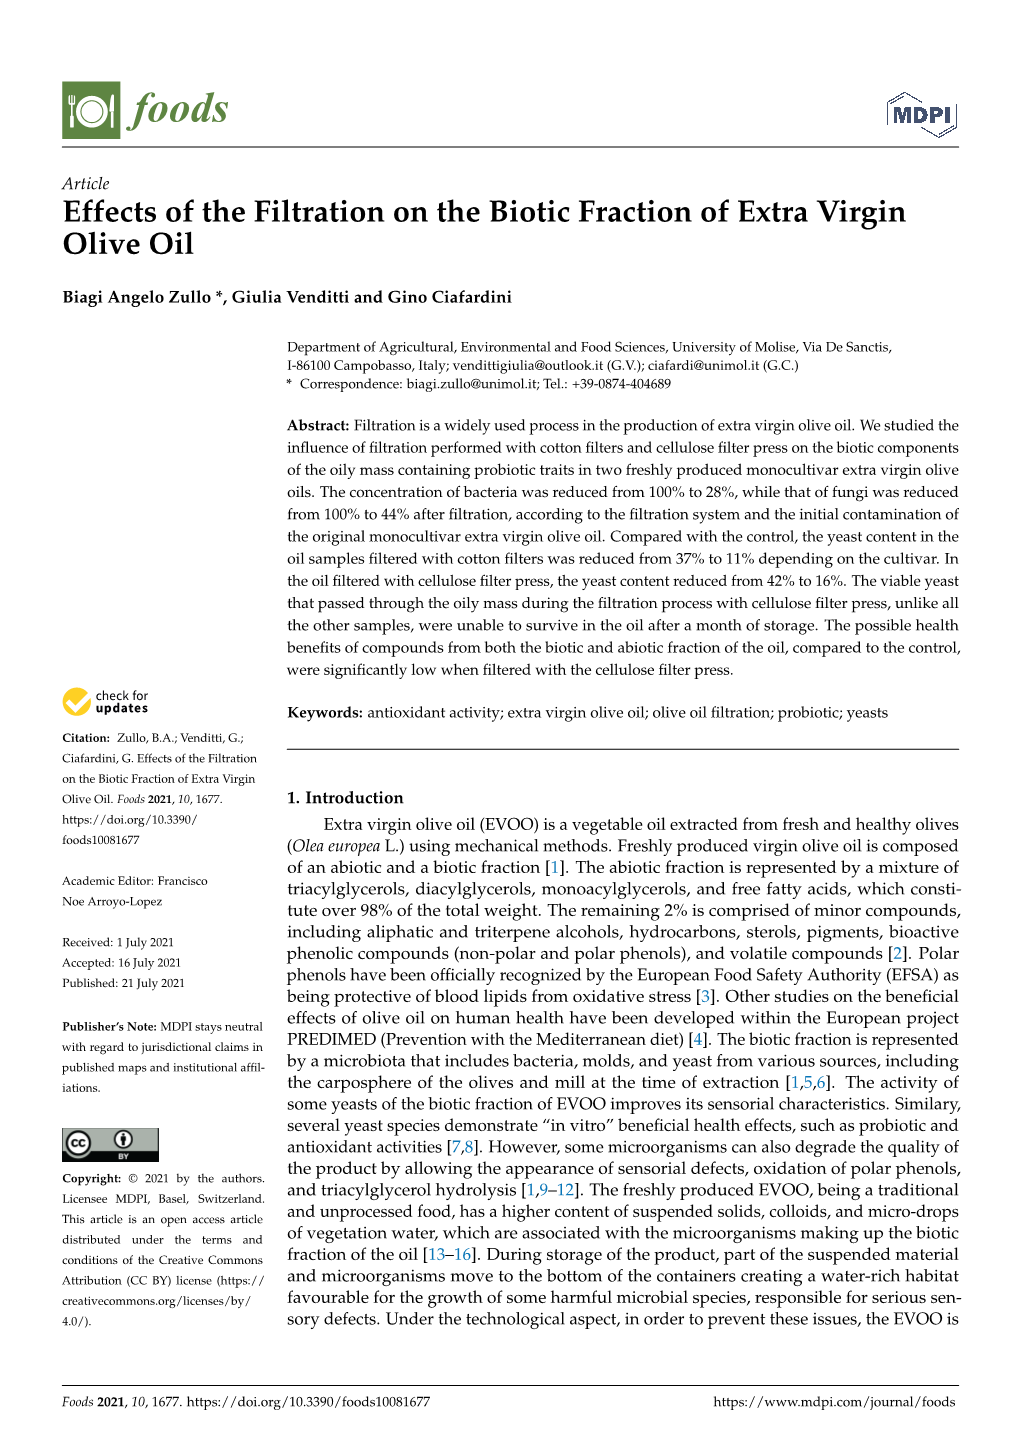 Effects of the Filtration on the Biotic Fraction of Extra Virgin Olive Oil